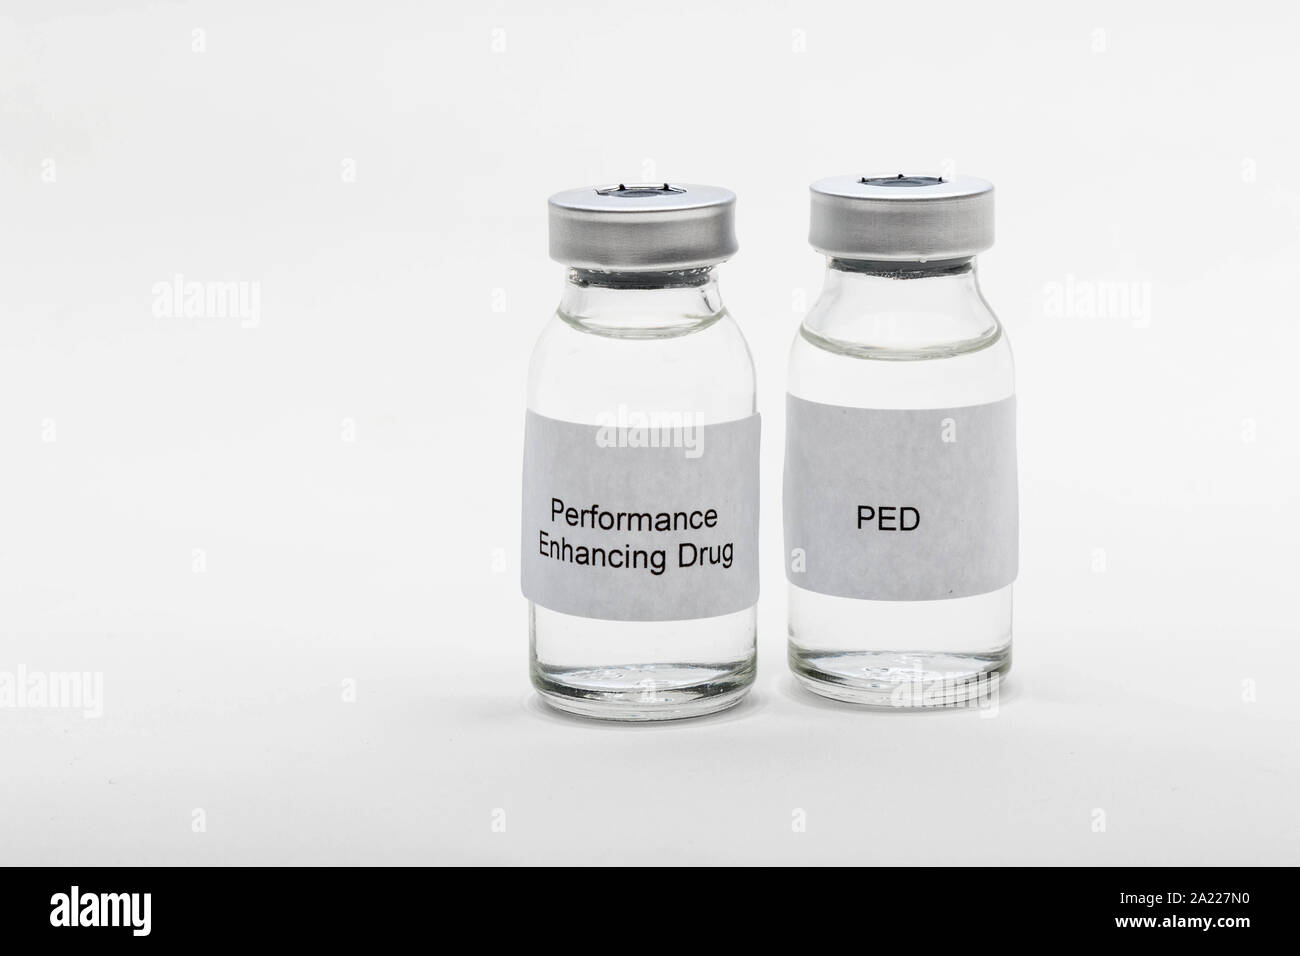 Medical concept showing medical 2 medical vials reading PED and Performance Enhancing Drug Stock Photo